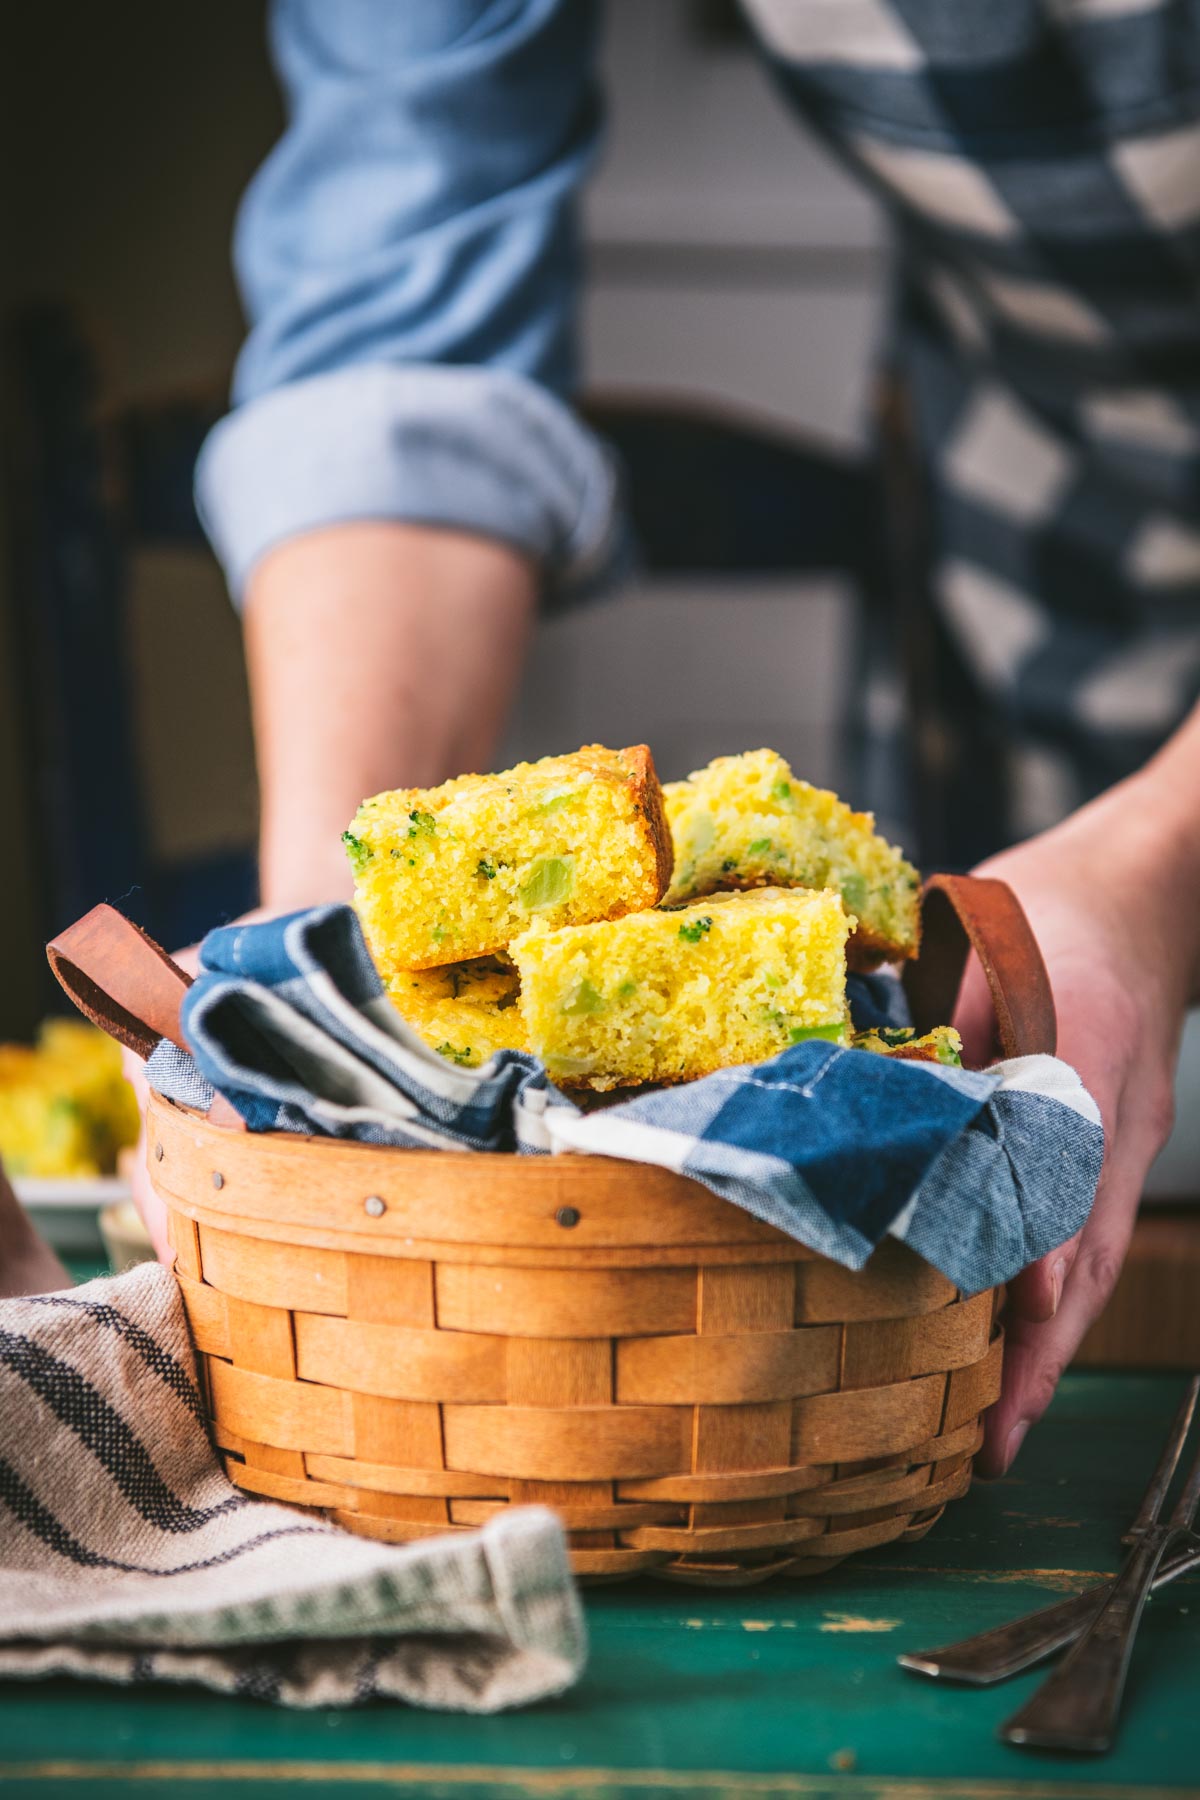 Hands serving a basket of broccoli cornbread on a table